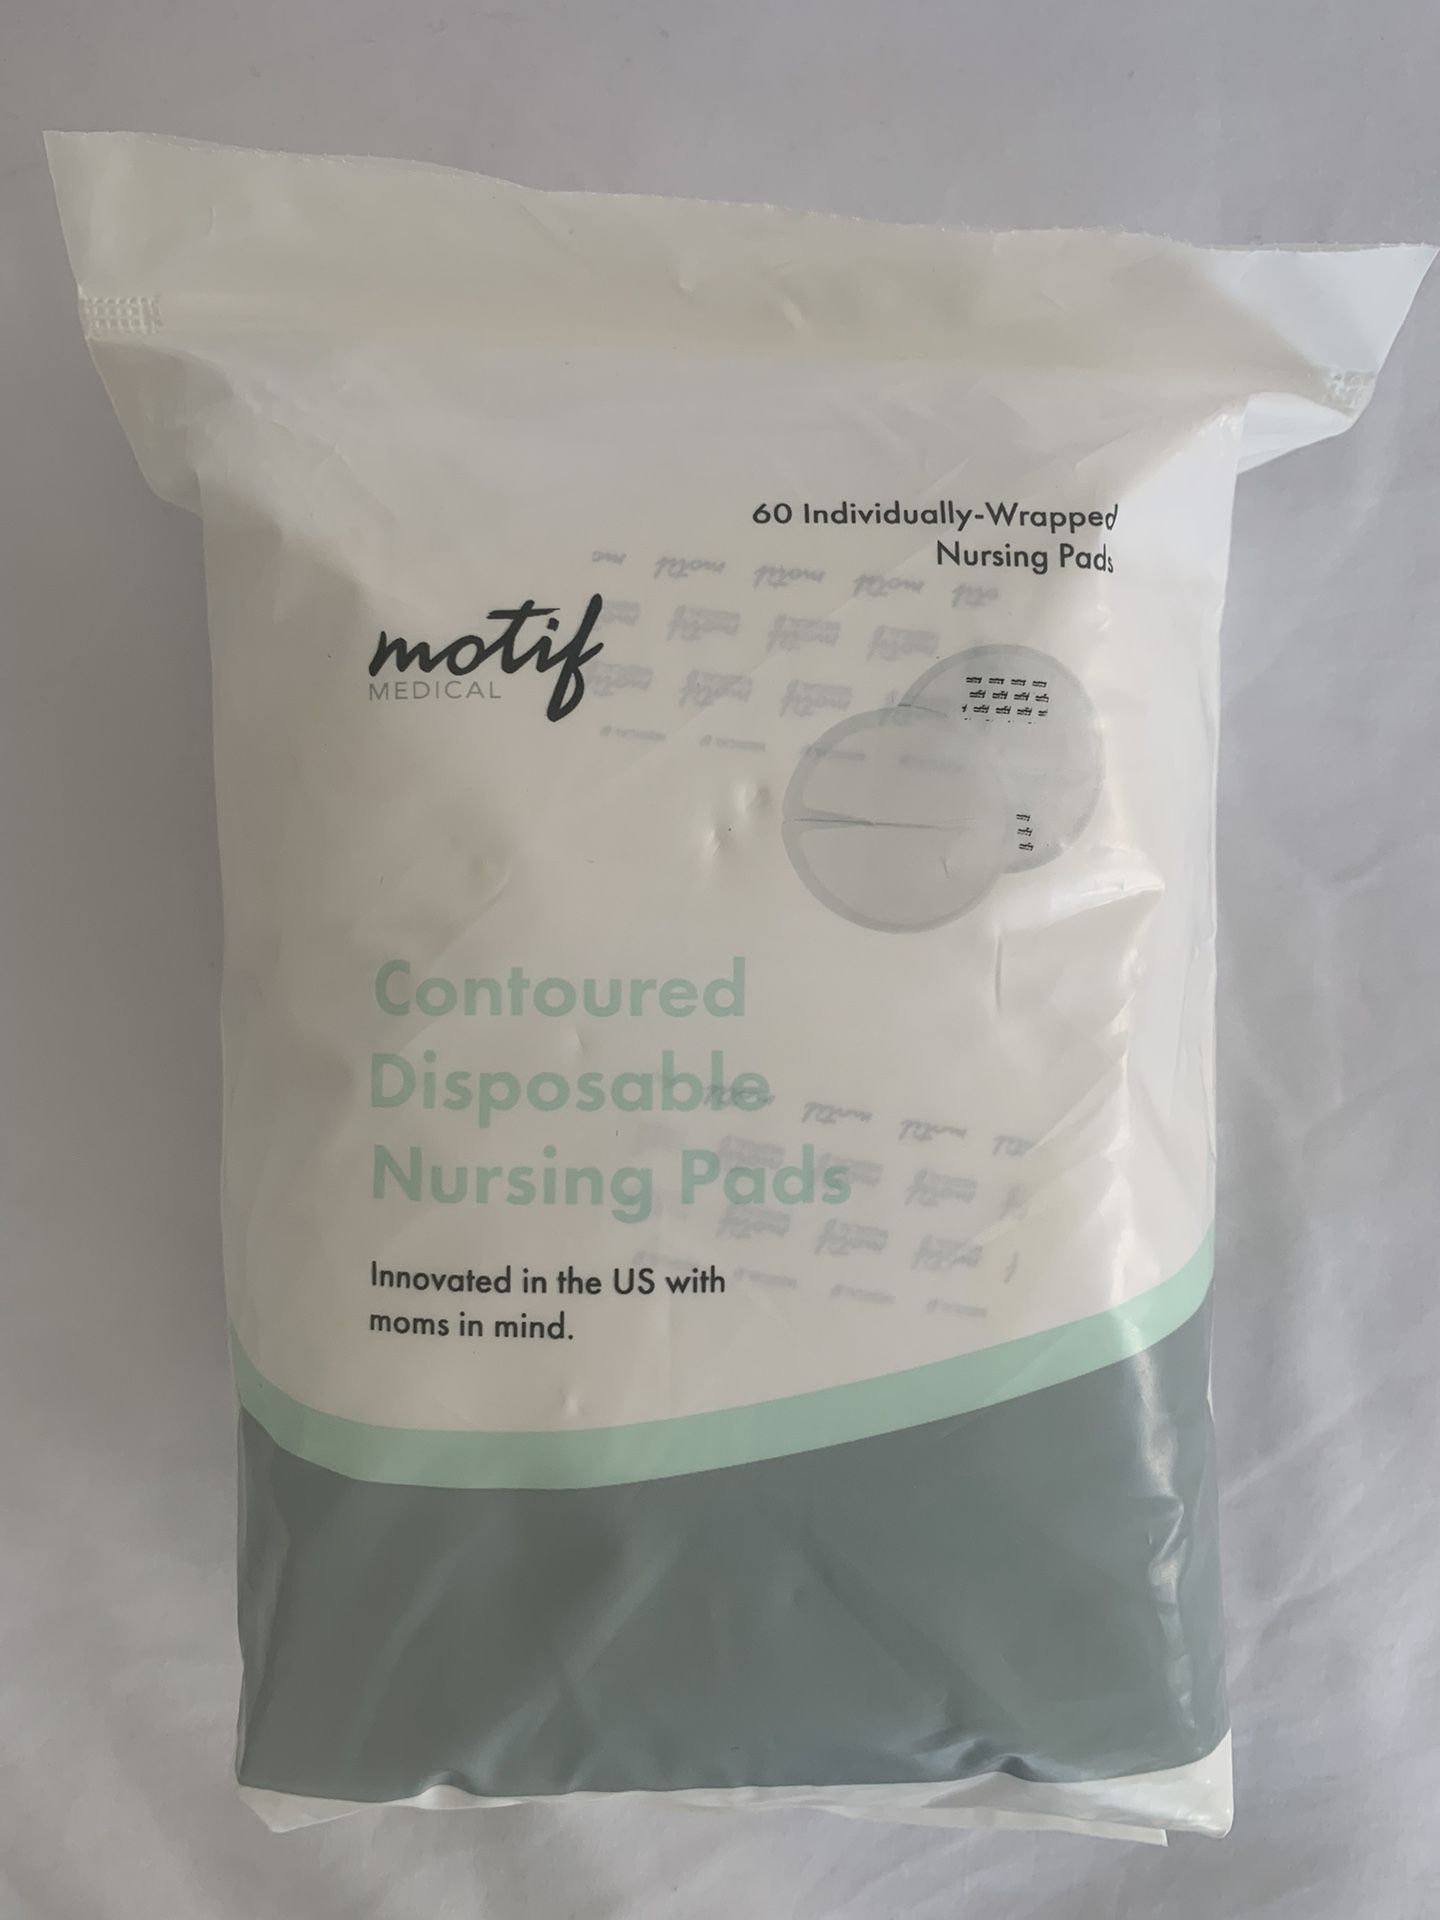 Motif Medical Contoured Disposable Nursing Pads 60 Count Individually Wrapped